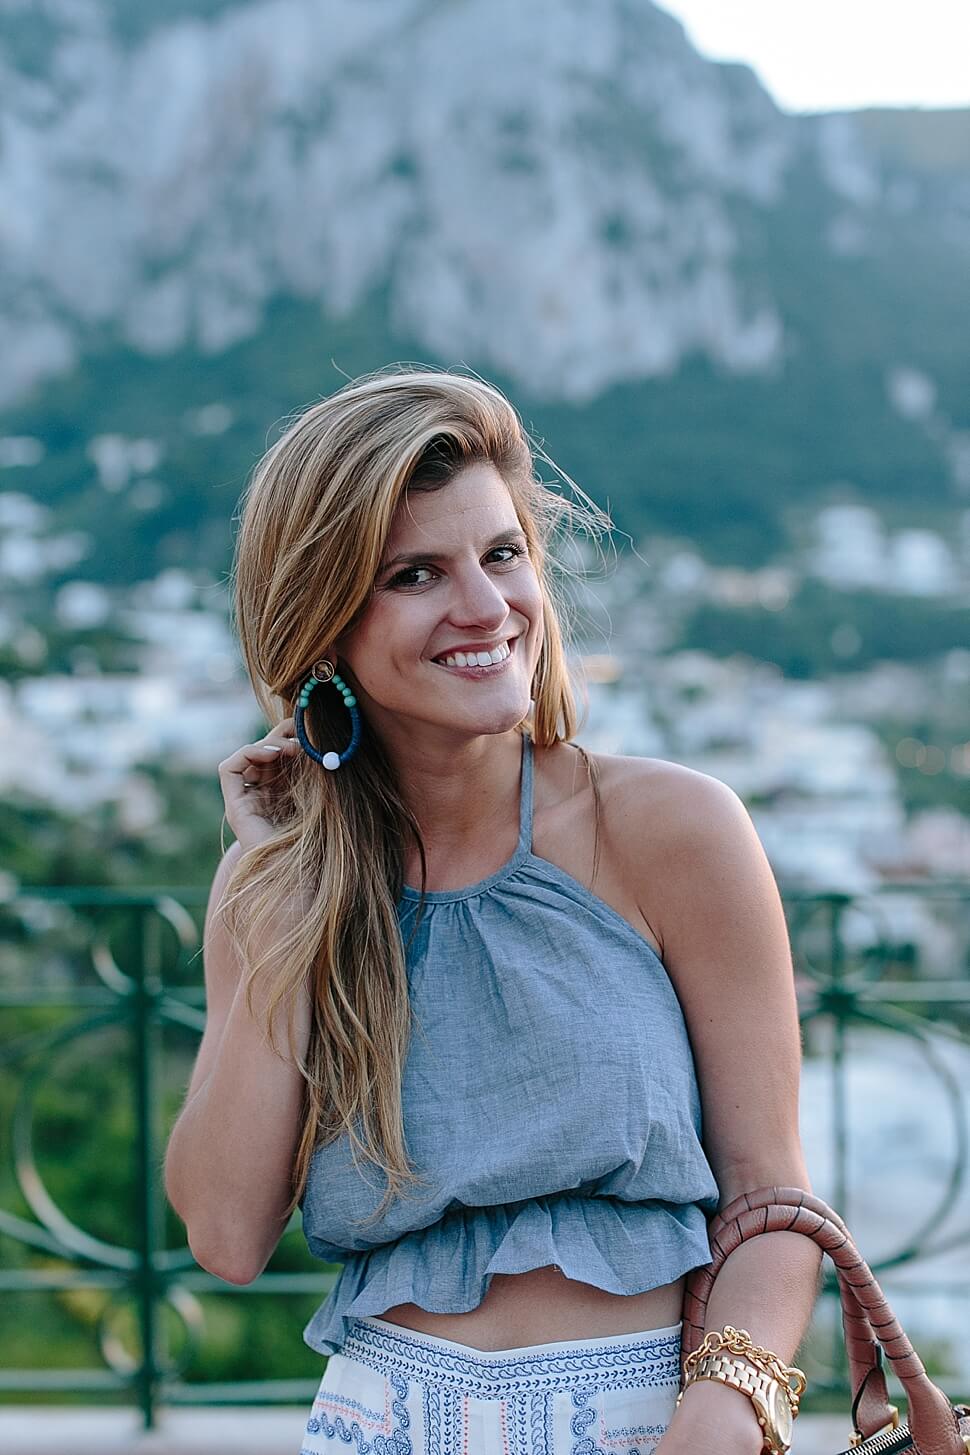 brightontheday wearing baublebar statement earrings and clalyton chambray top in capri italy